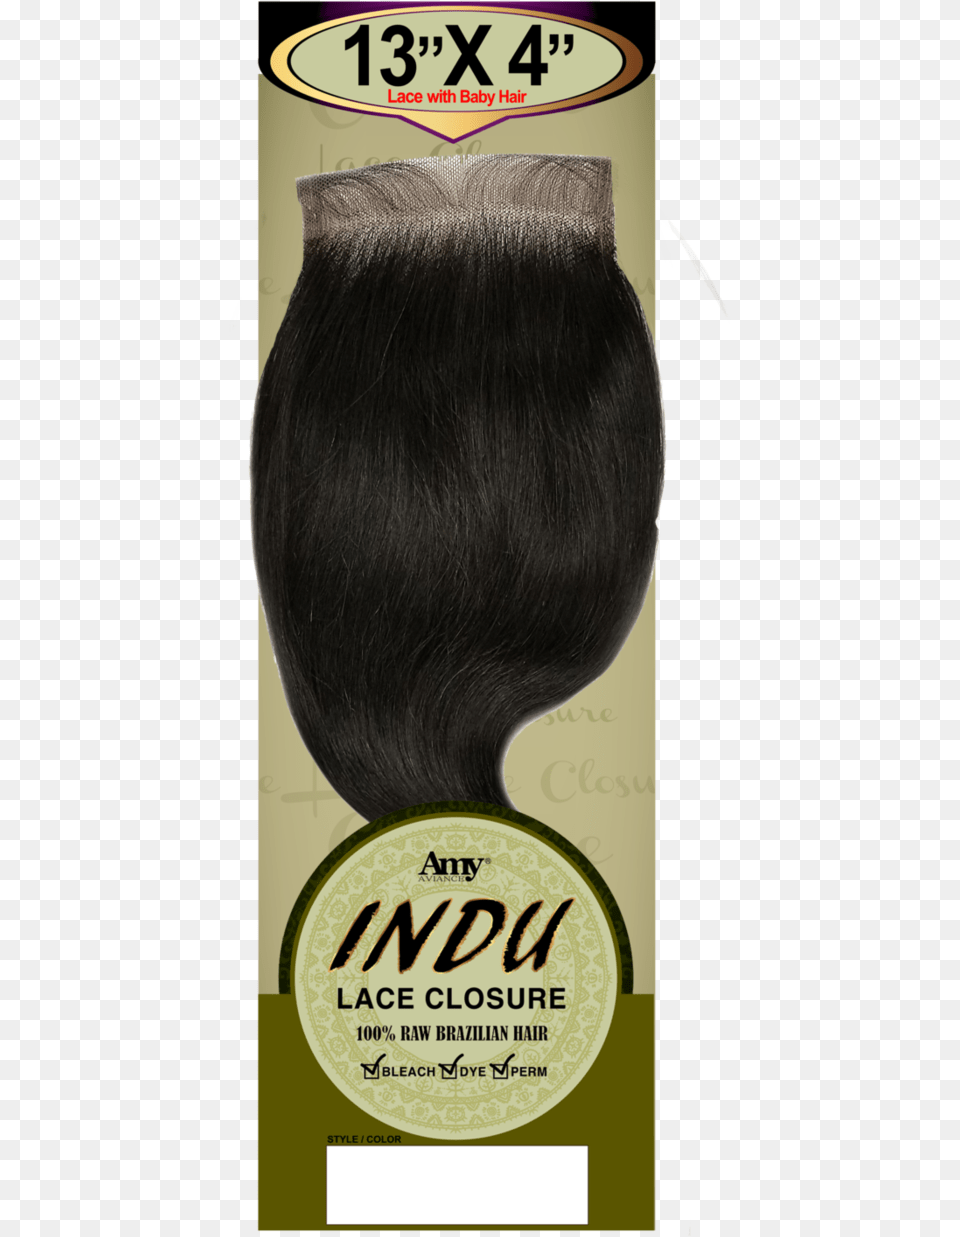 Indu Lace Closure S Body 14 Amy Indu Lace Closure, Hair, Person Free Png